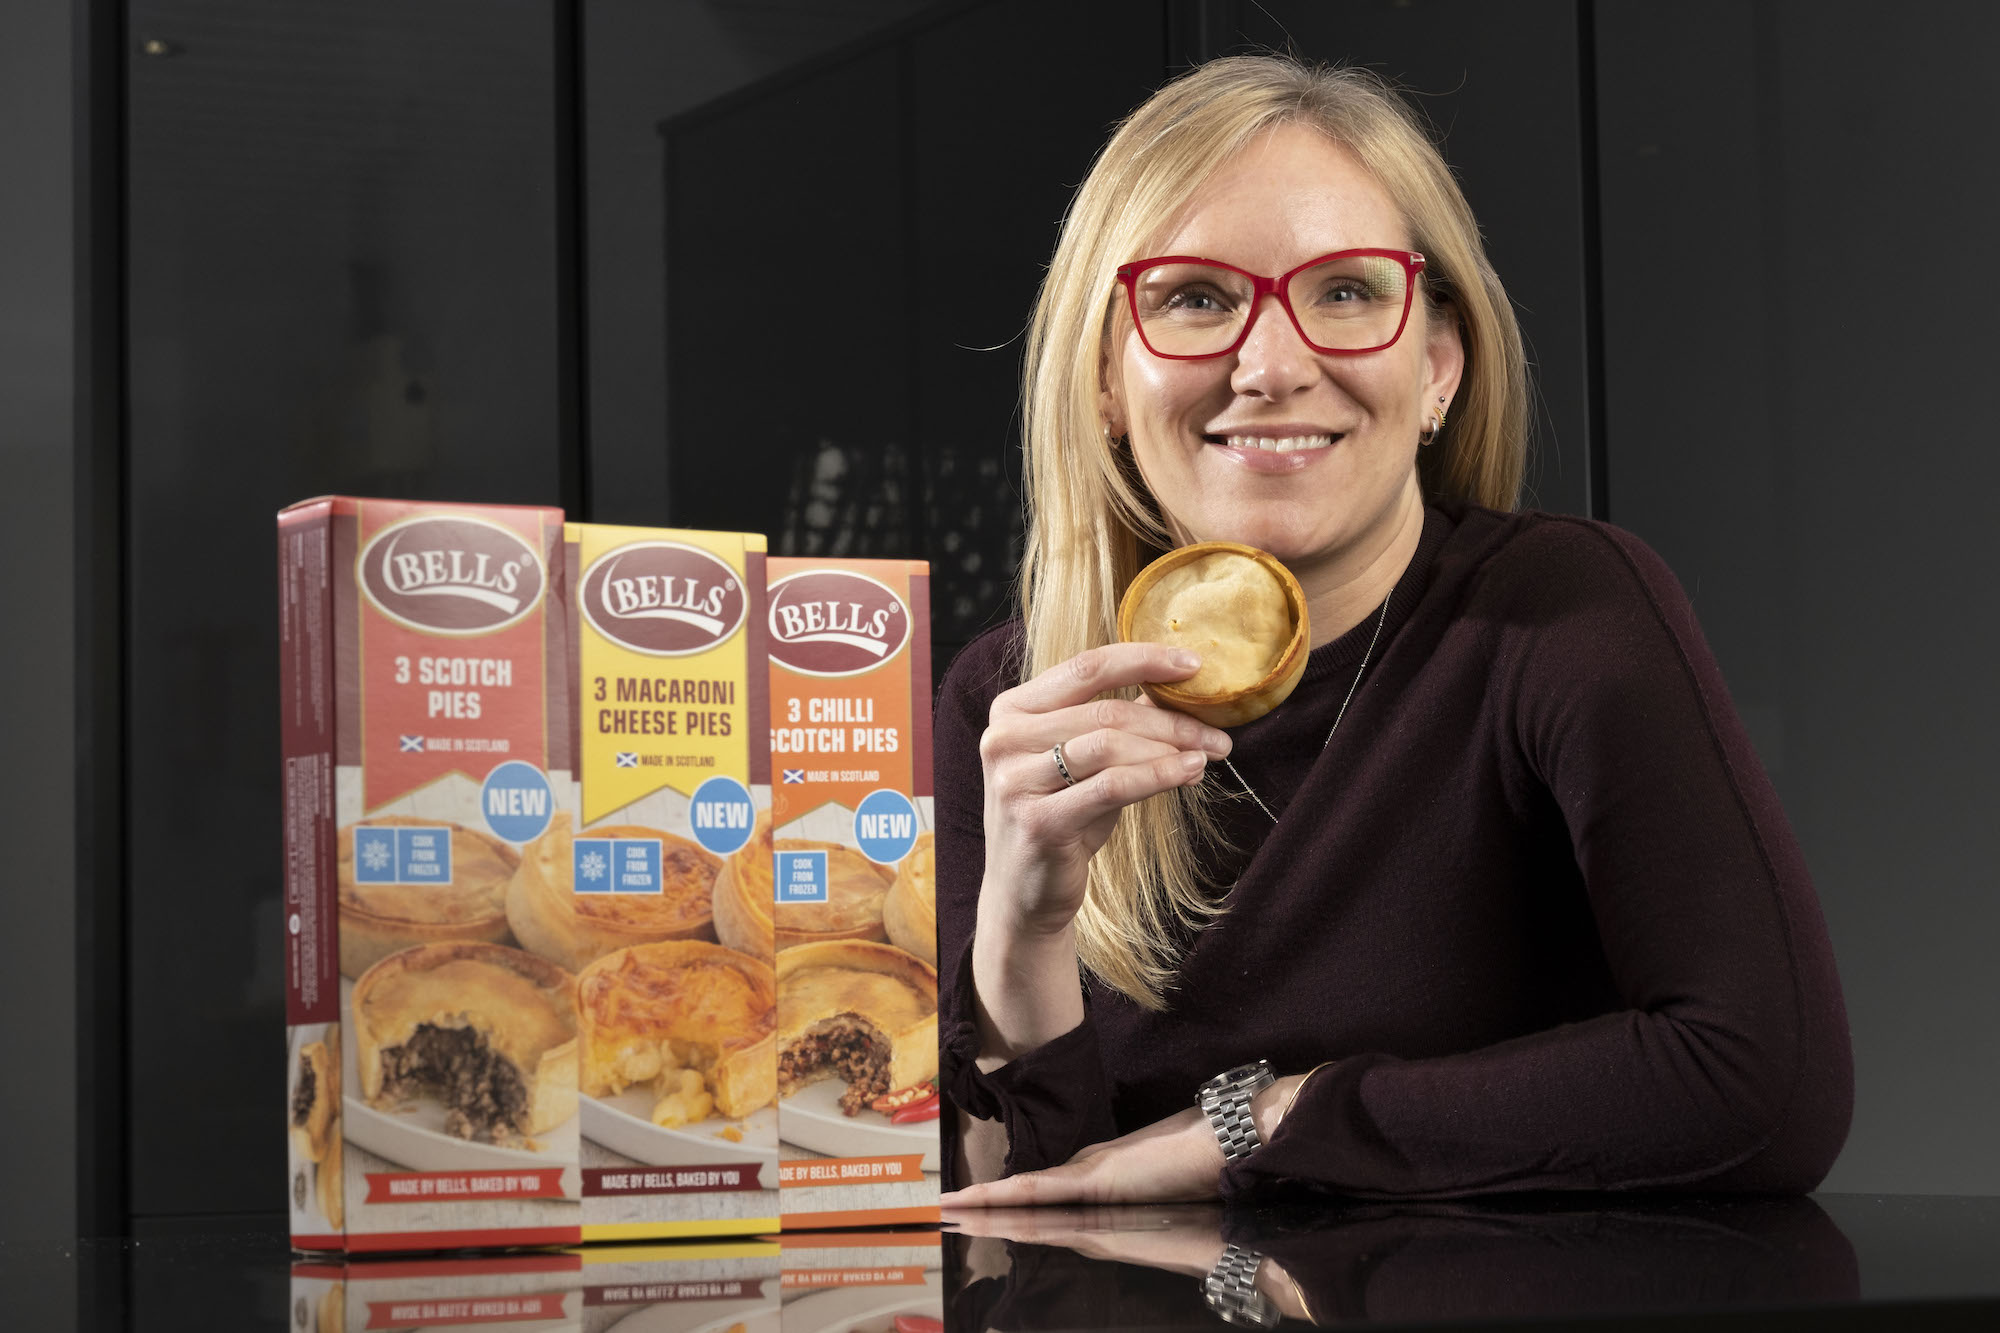 Bells Food Group retains fourth spot in Kantar’s Scottish brand rankings amid £250k investment